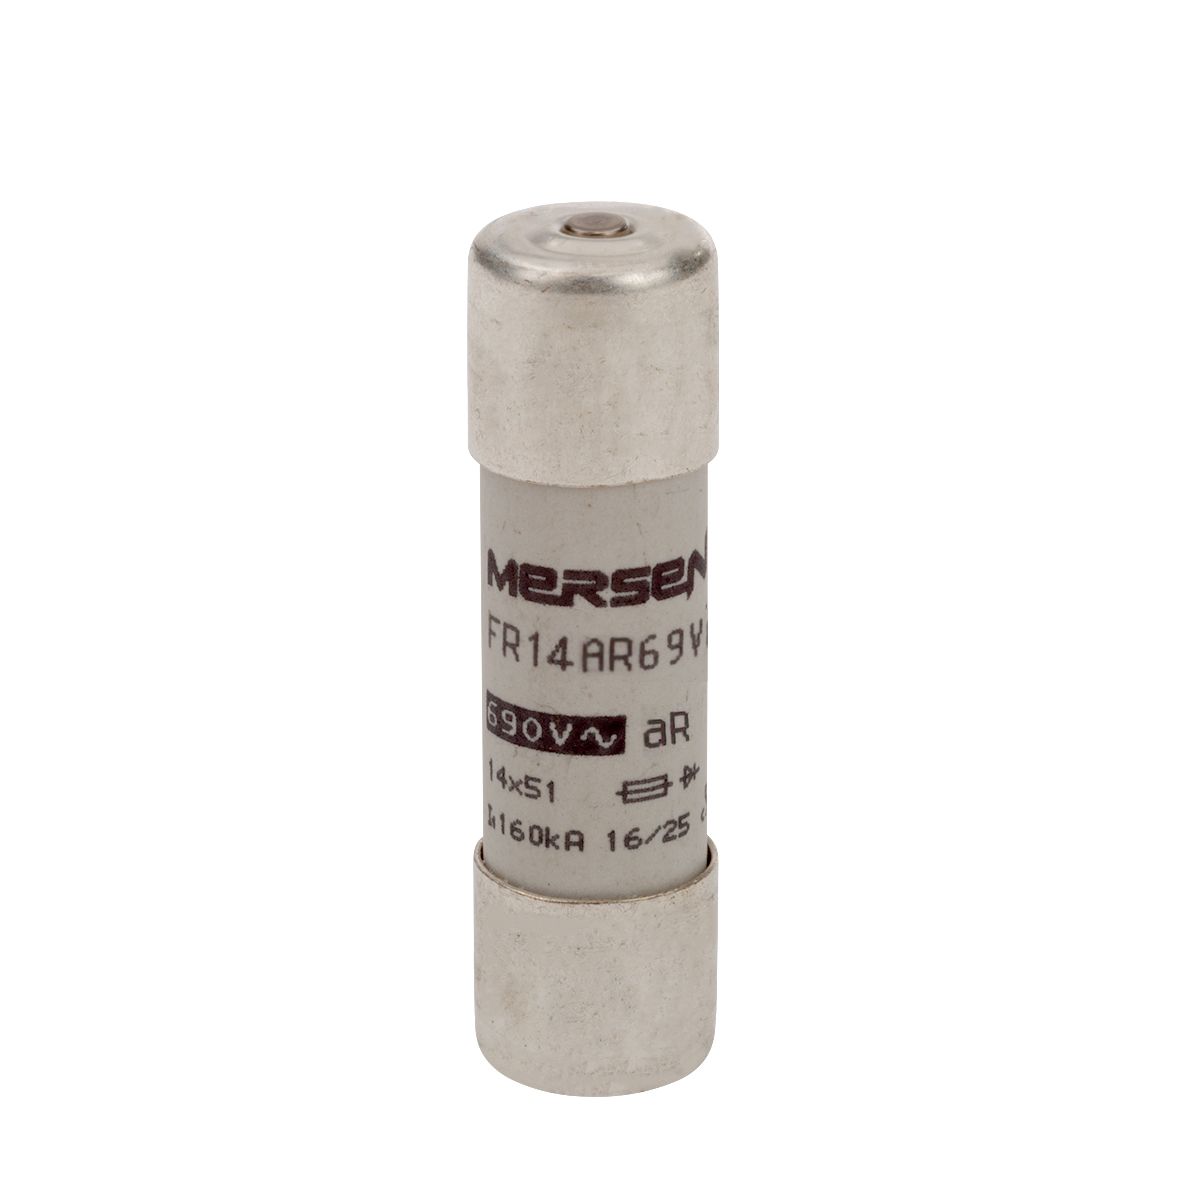 Z1056665 - Cylindrical fuse-link aR 690VAC 14x51, 50A, with indicator